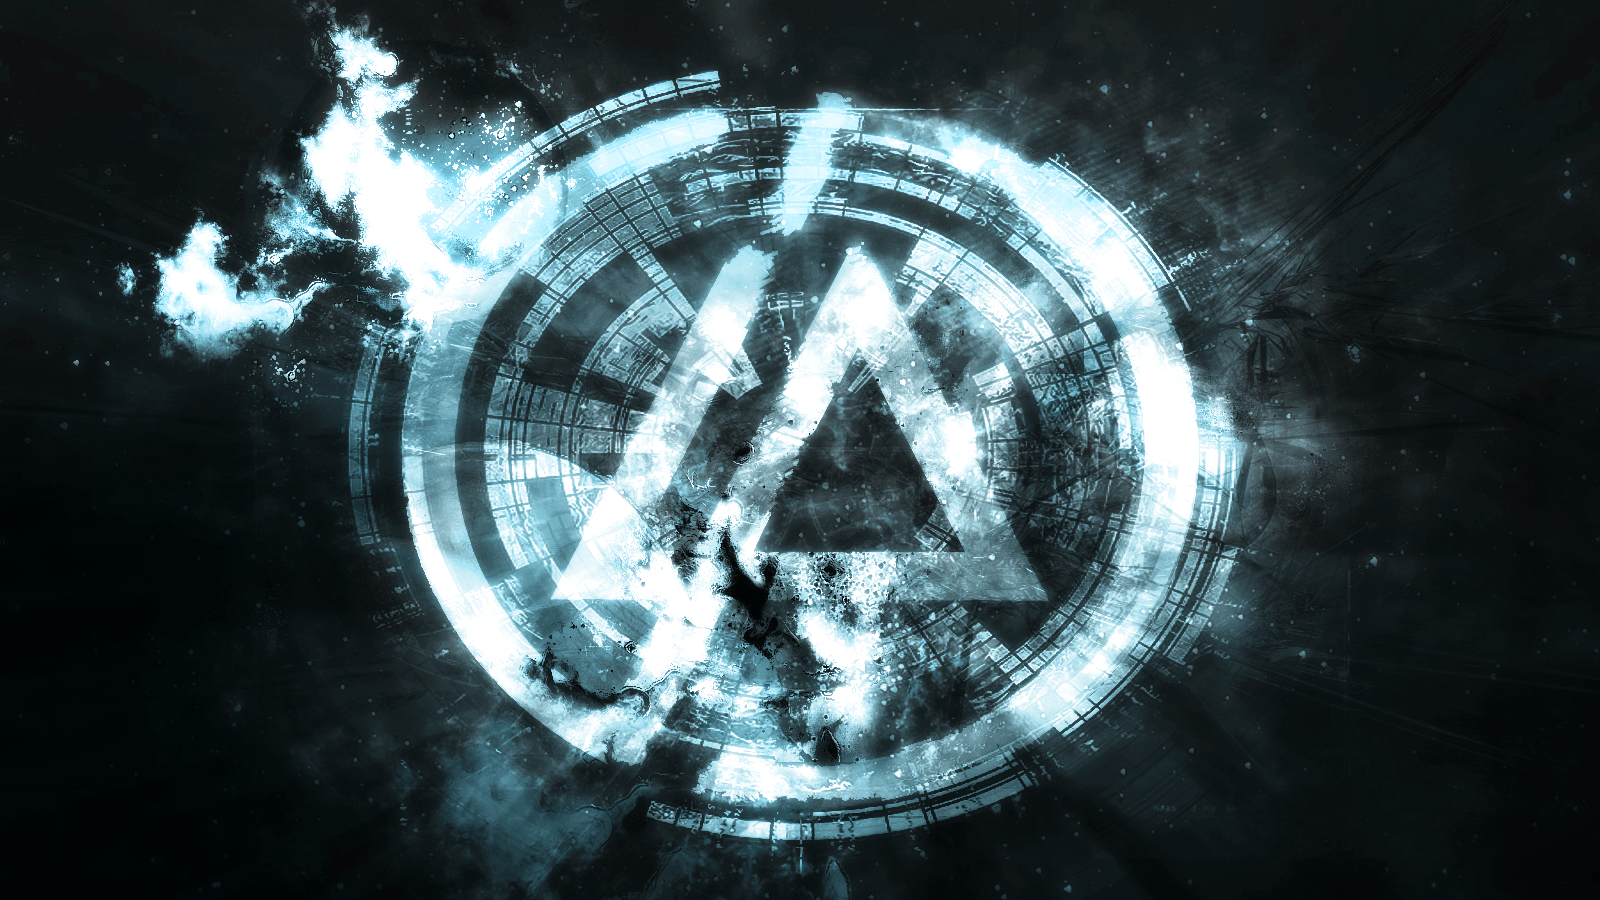 Discover 68+ wallpaper linkin park best - in.cdgdbentre